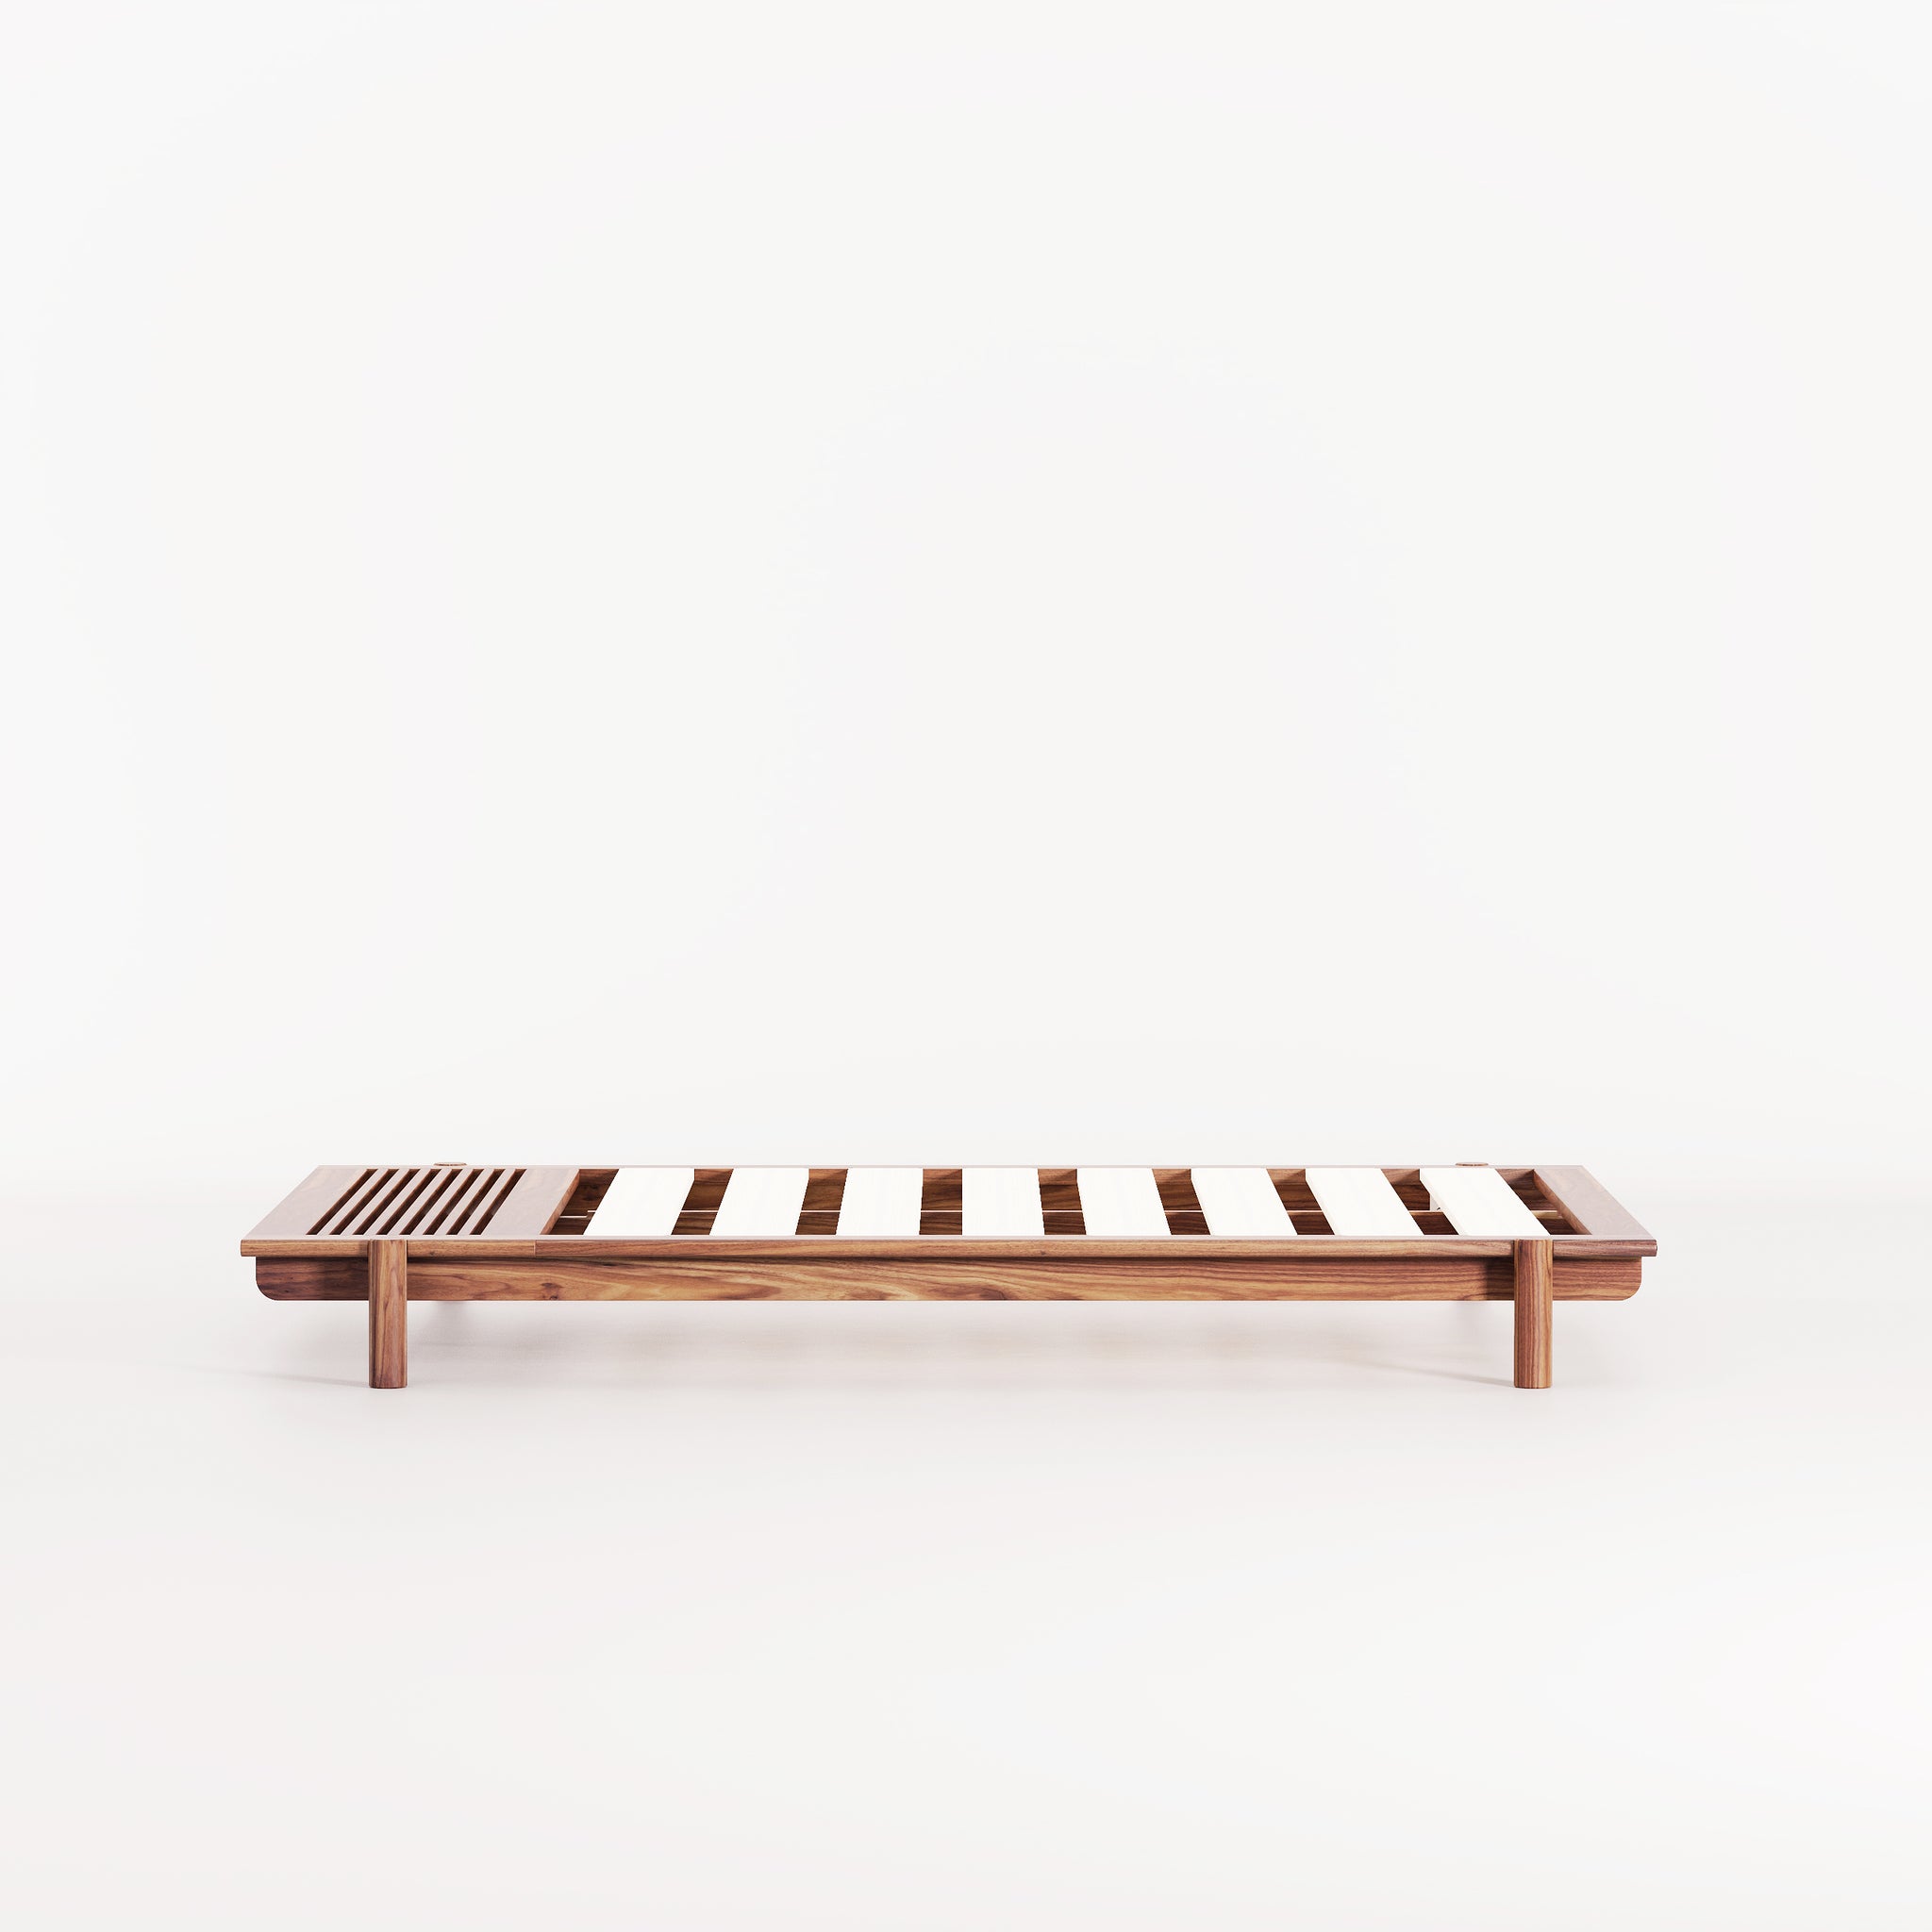 A beautiful, modern, Australian made timber platform bed with built-in bench seat.